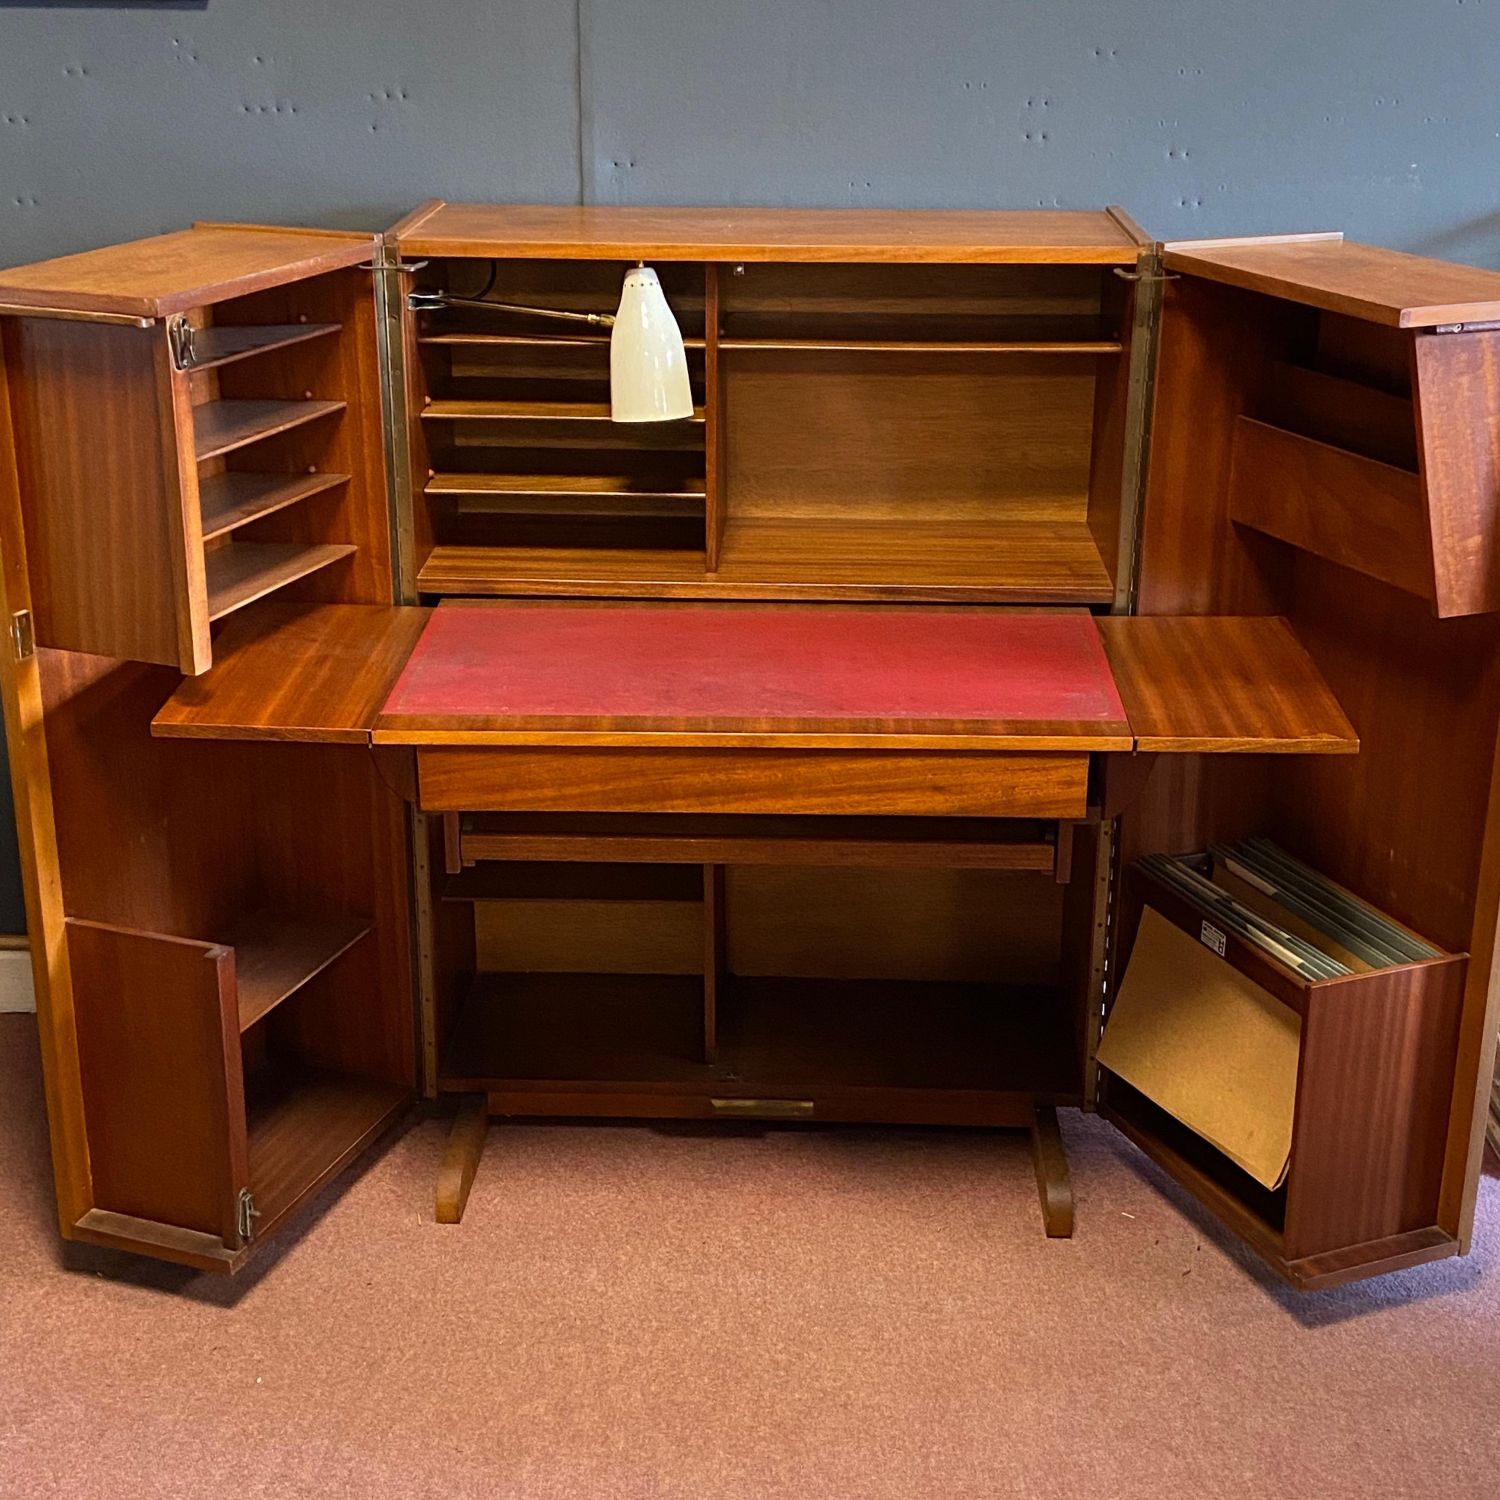 Magic Box Style Home Office System - Furniture etc - Hemswell Antique ...